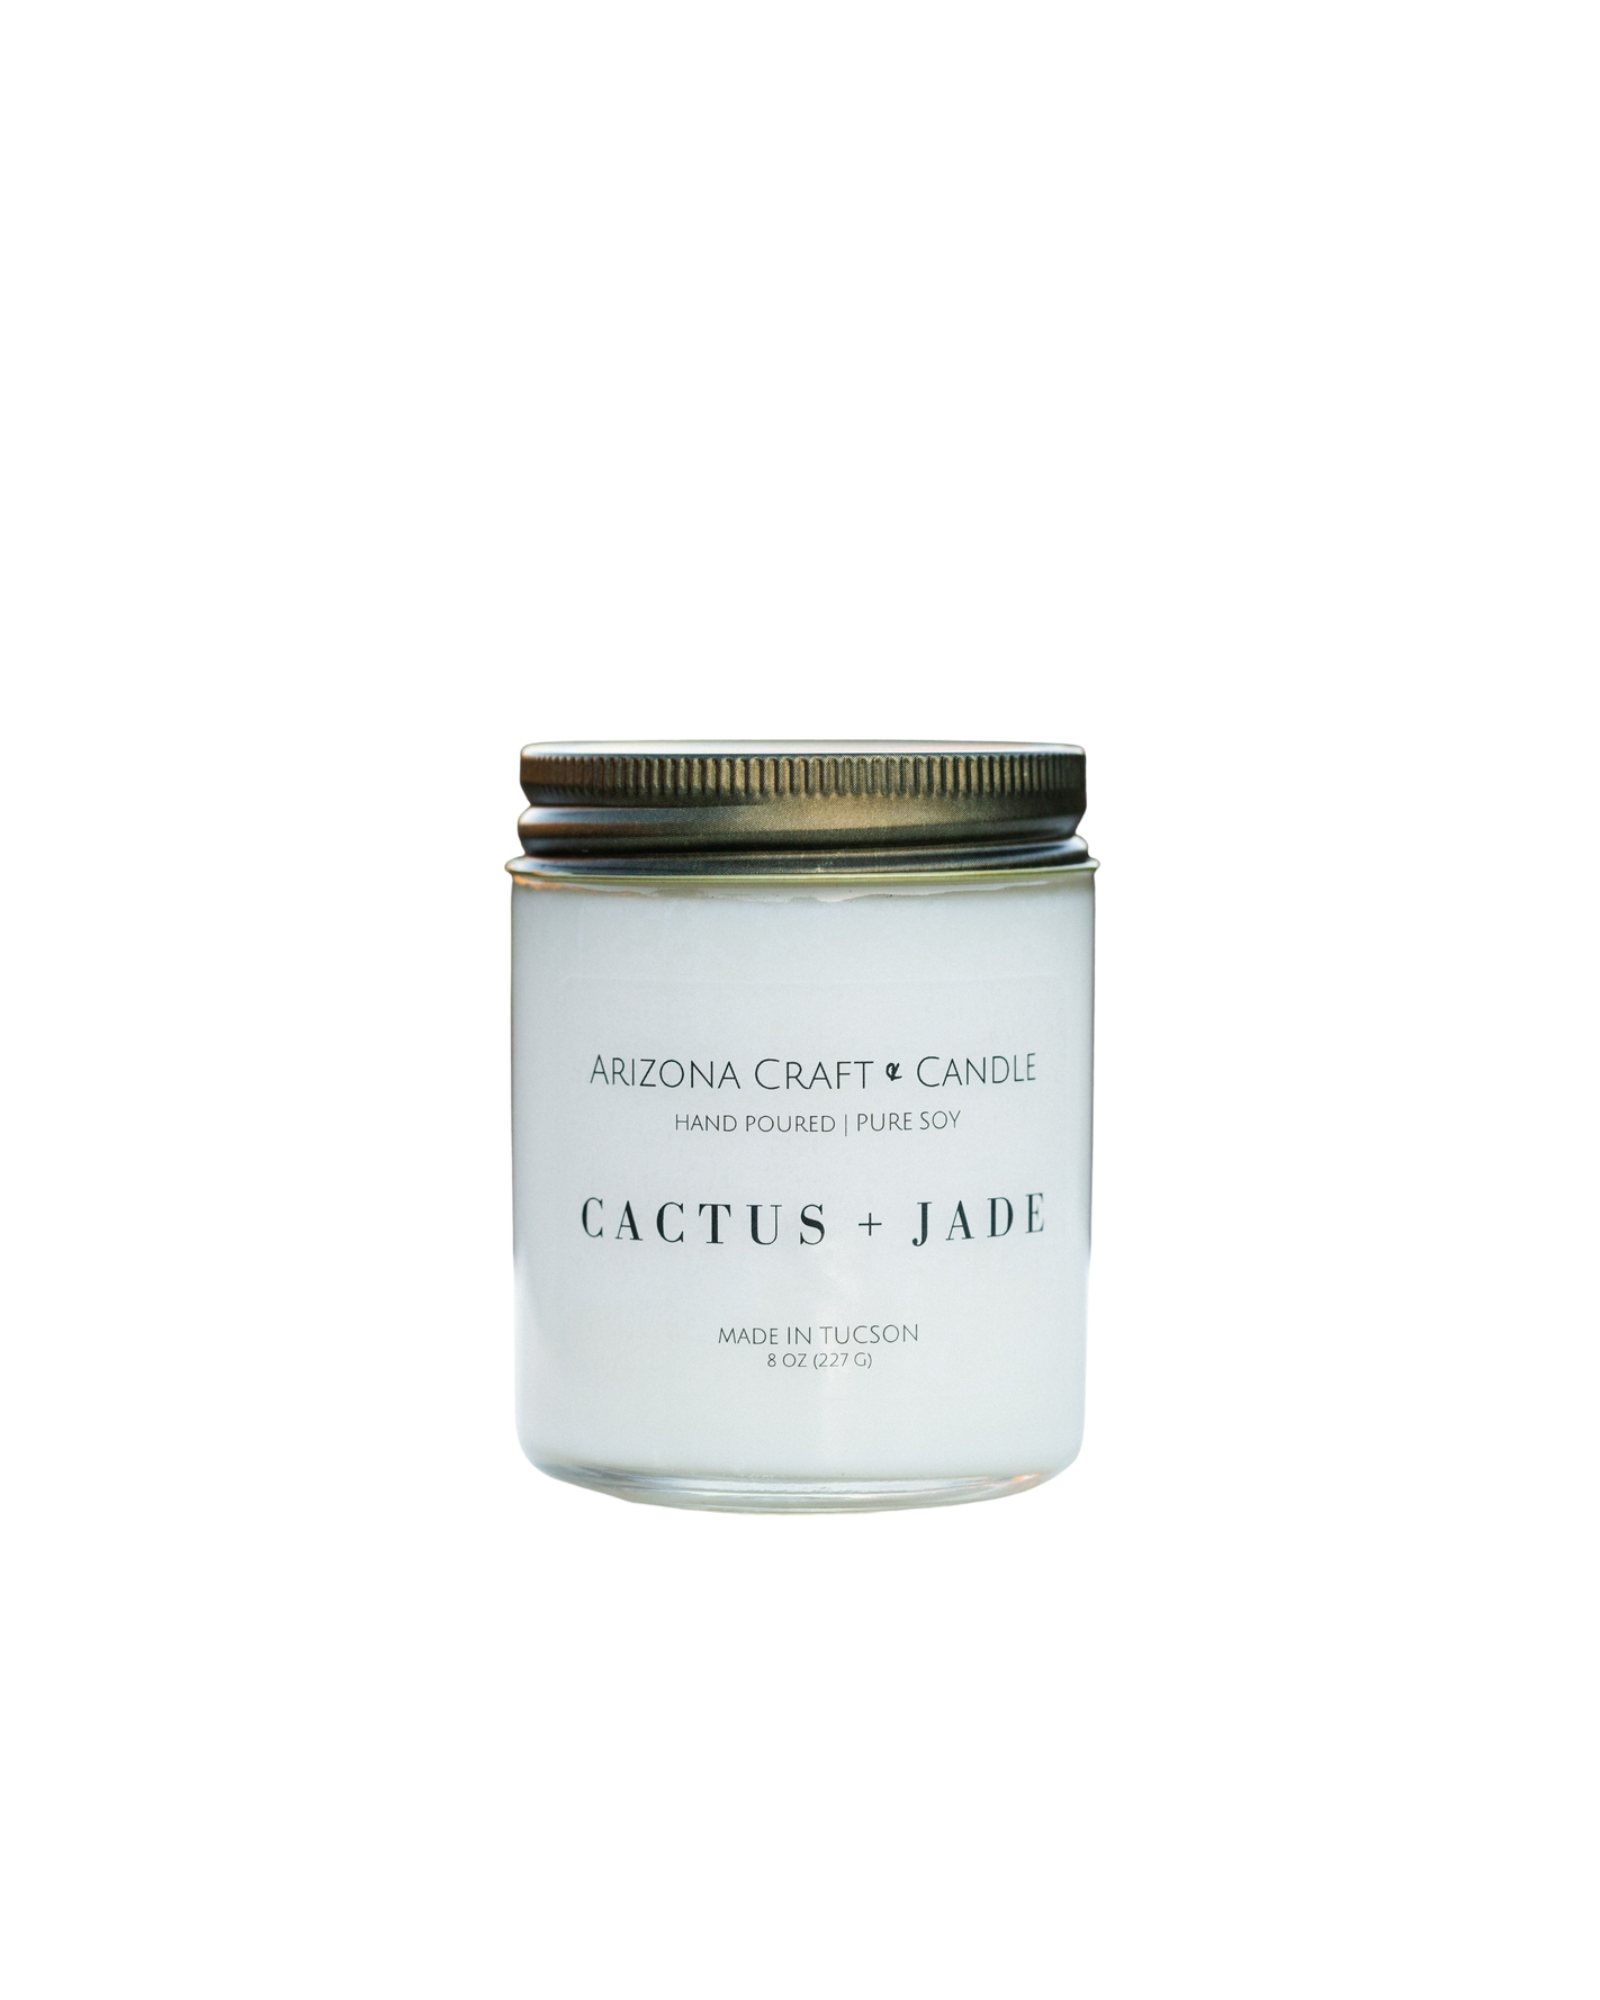 Clear glass jar candle with gold lid. Cactus and jade scent from Arizona Craft and Candle. 